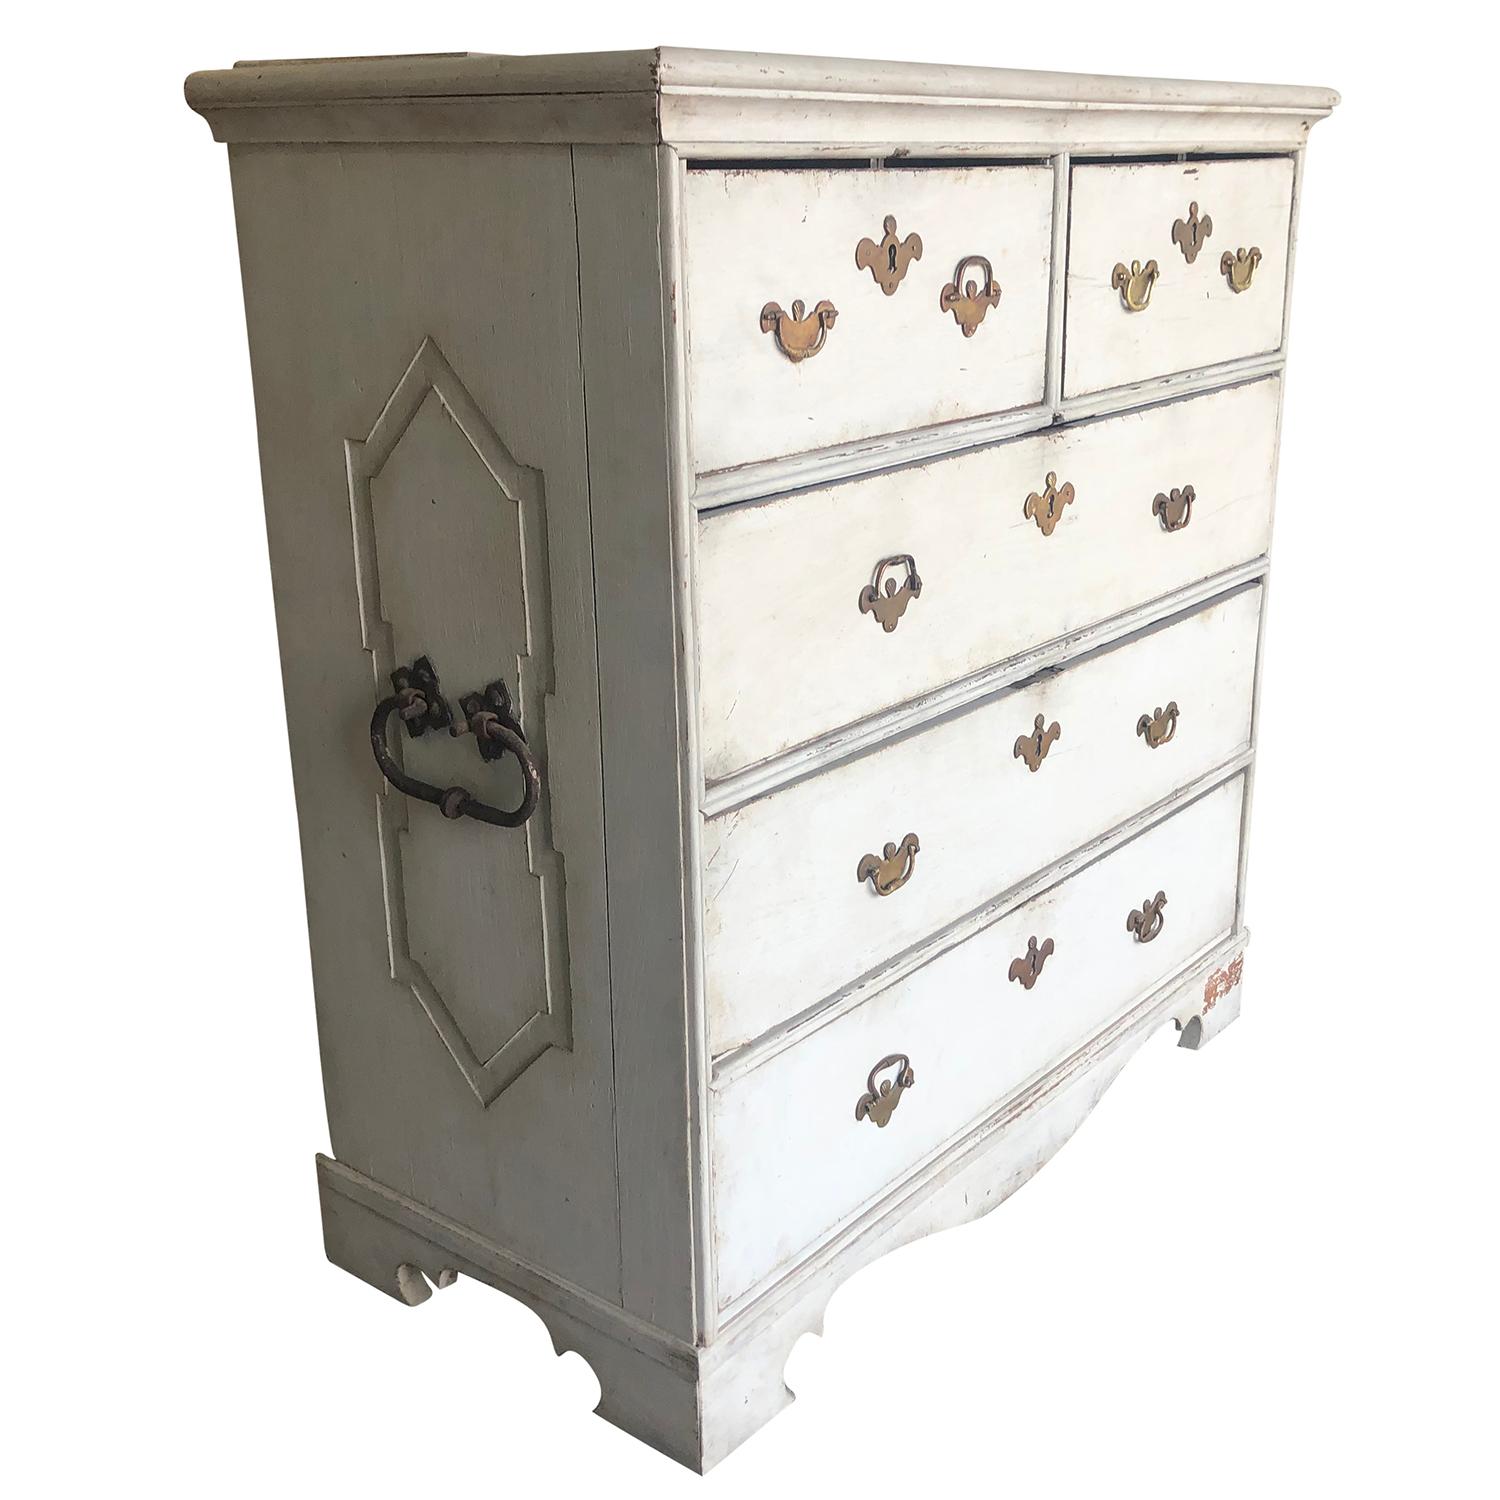 An antique Swedish Gustavian, fine traveler Scandinavian chest of drawers in painted oakwood with five drawers, enhanced by detailed hand carved side panels with brass hardware and metal handle in good condition. Refreshed grey-crème finish. Wear